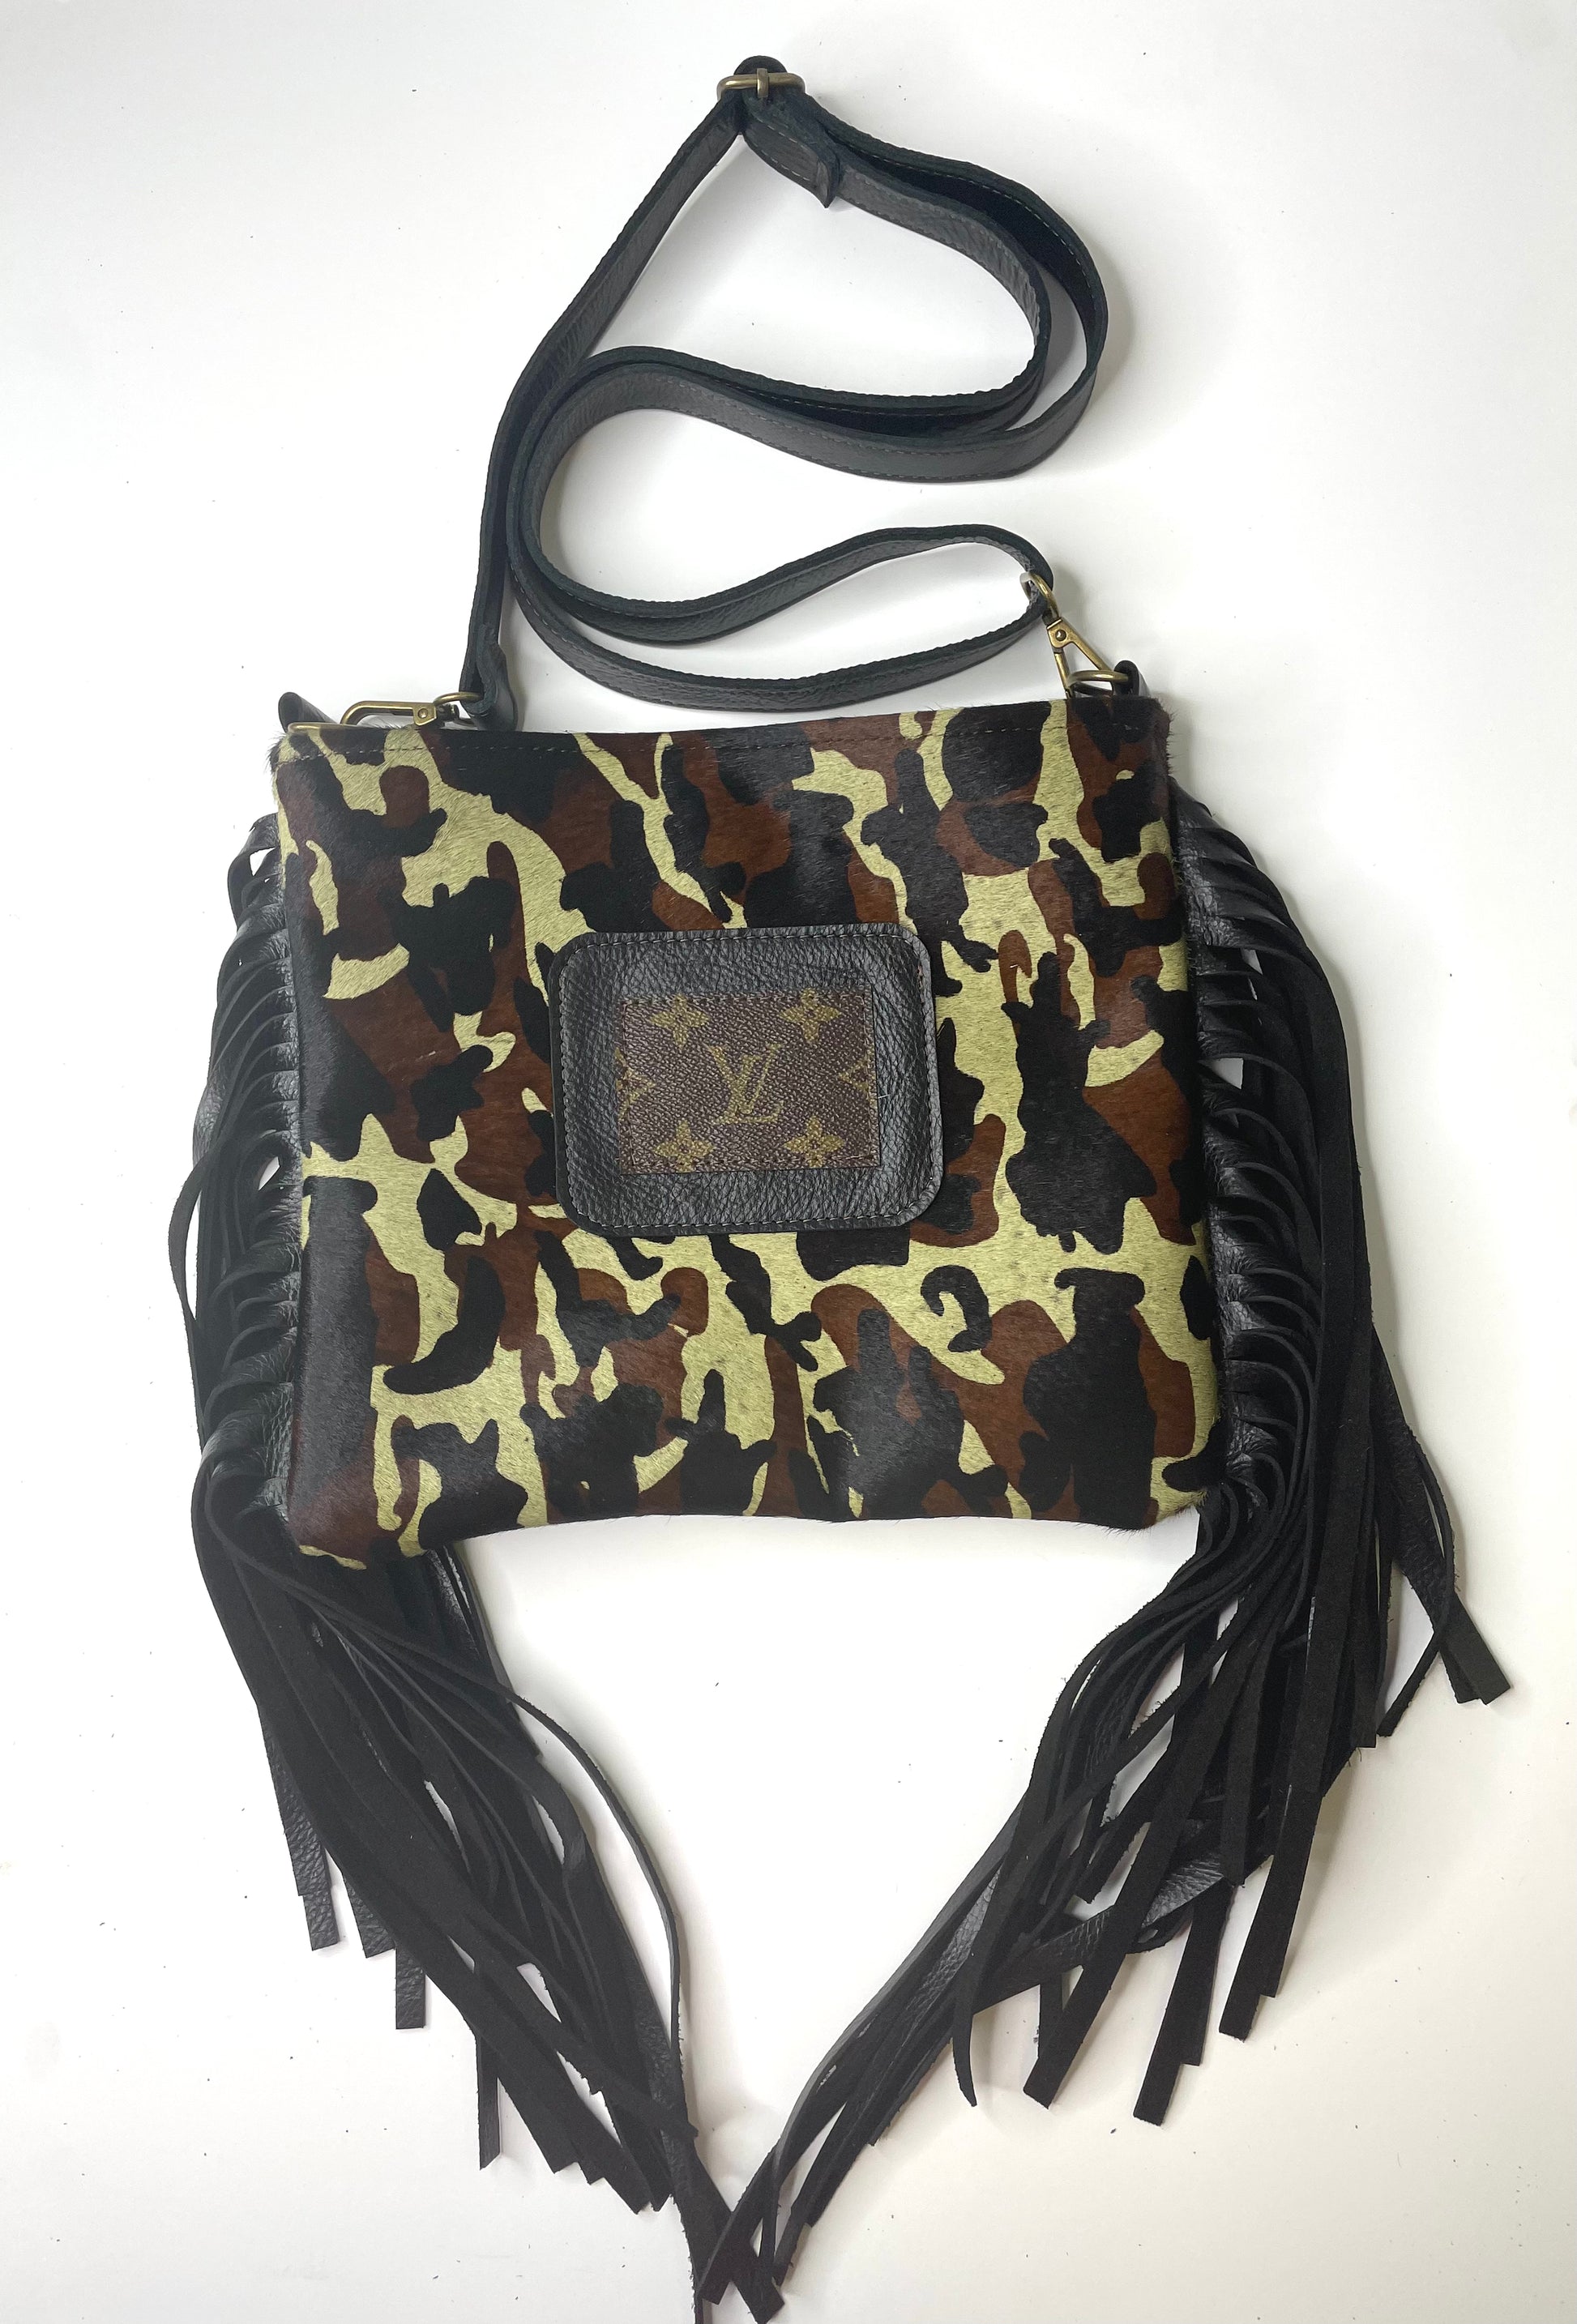 Medium Crossbody - Camo in Black (patch) - Patches Of Upcycling